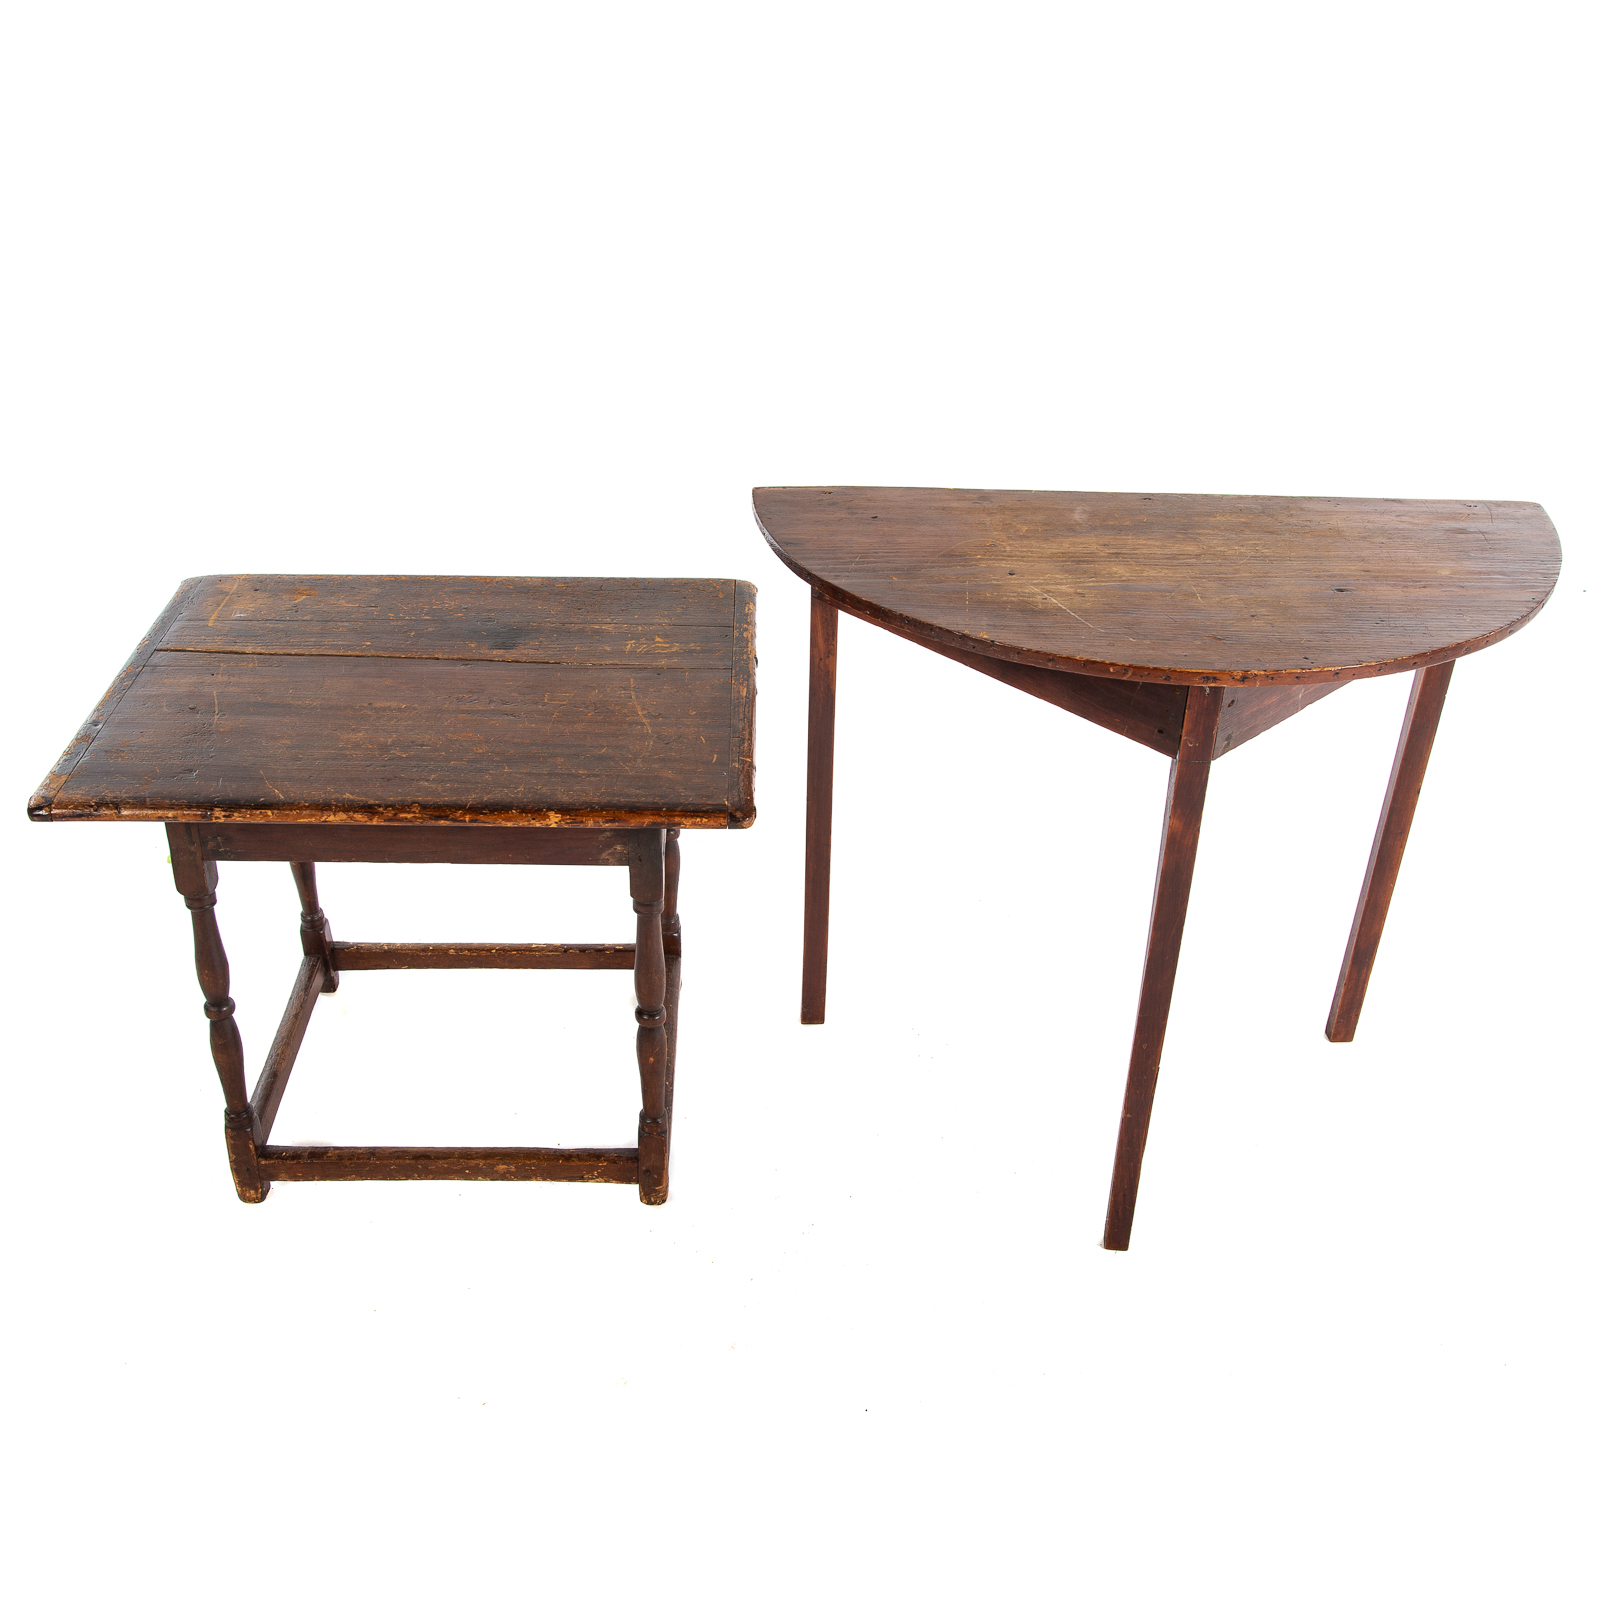 TWO AMERICAN PRIMITIVE TABLES 19th